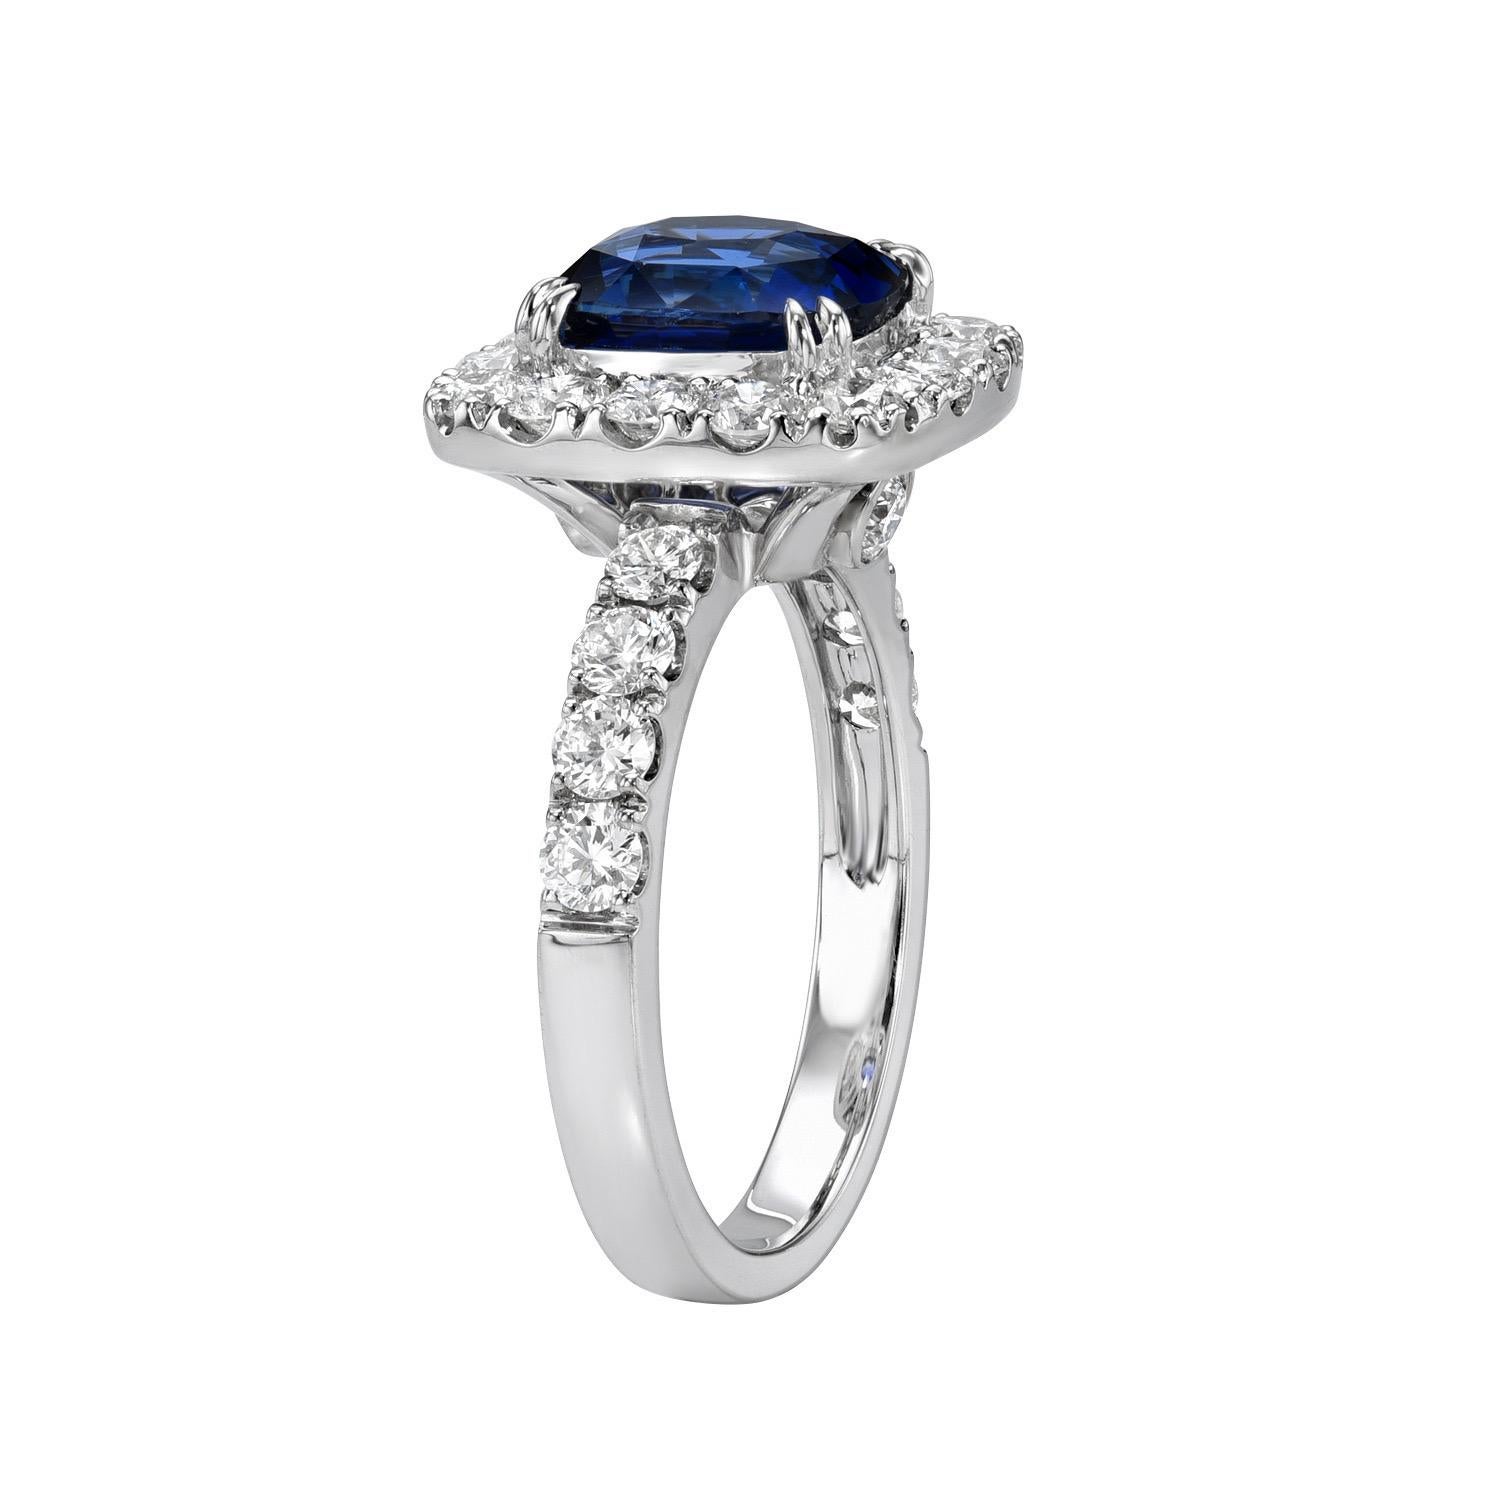 2.71 carat Royal Blue Sapphire cushion 18K white gold ring, decorated with round brilliant diamonds totaling 1.47 carats.
Ring size 6.5. Resizing is complementary upon request.
Returns are accepted and paid by us within 7 days of delivery.